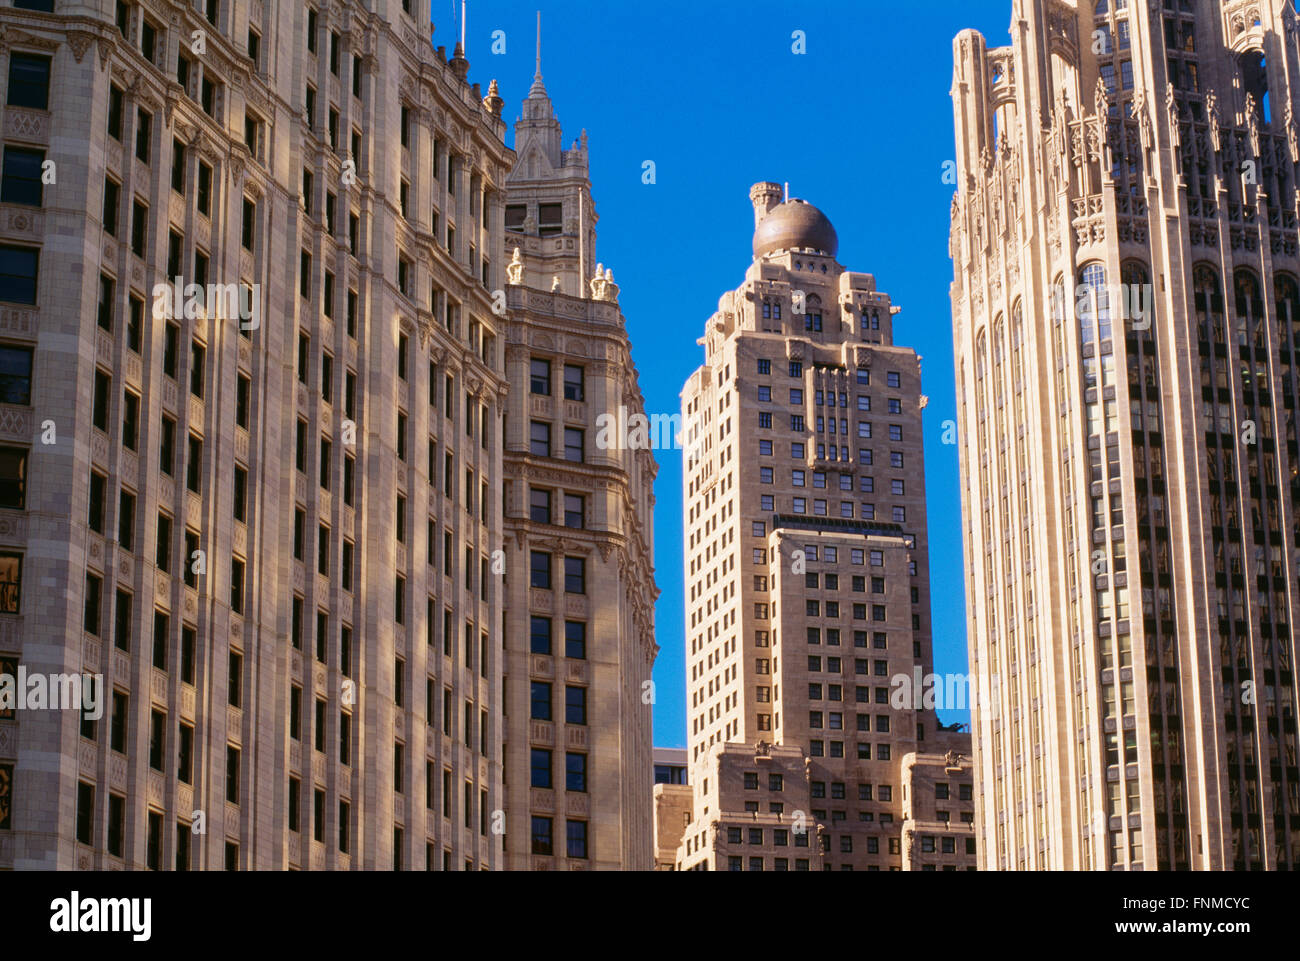 Historic Skyscrapers (Hotel Inter-Continental, Fisher Building, Tribune Tower) In Chicago, Illinois, Usa Stock Photo